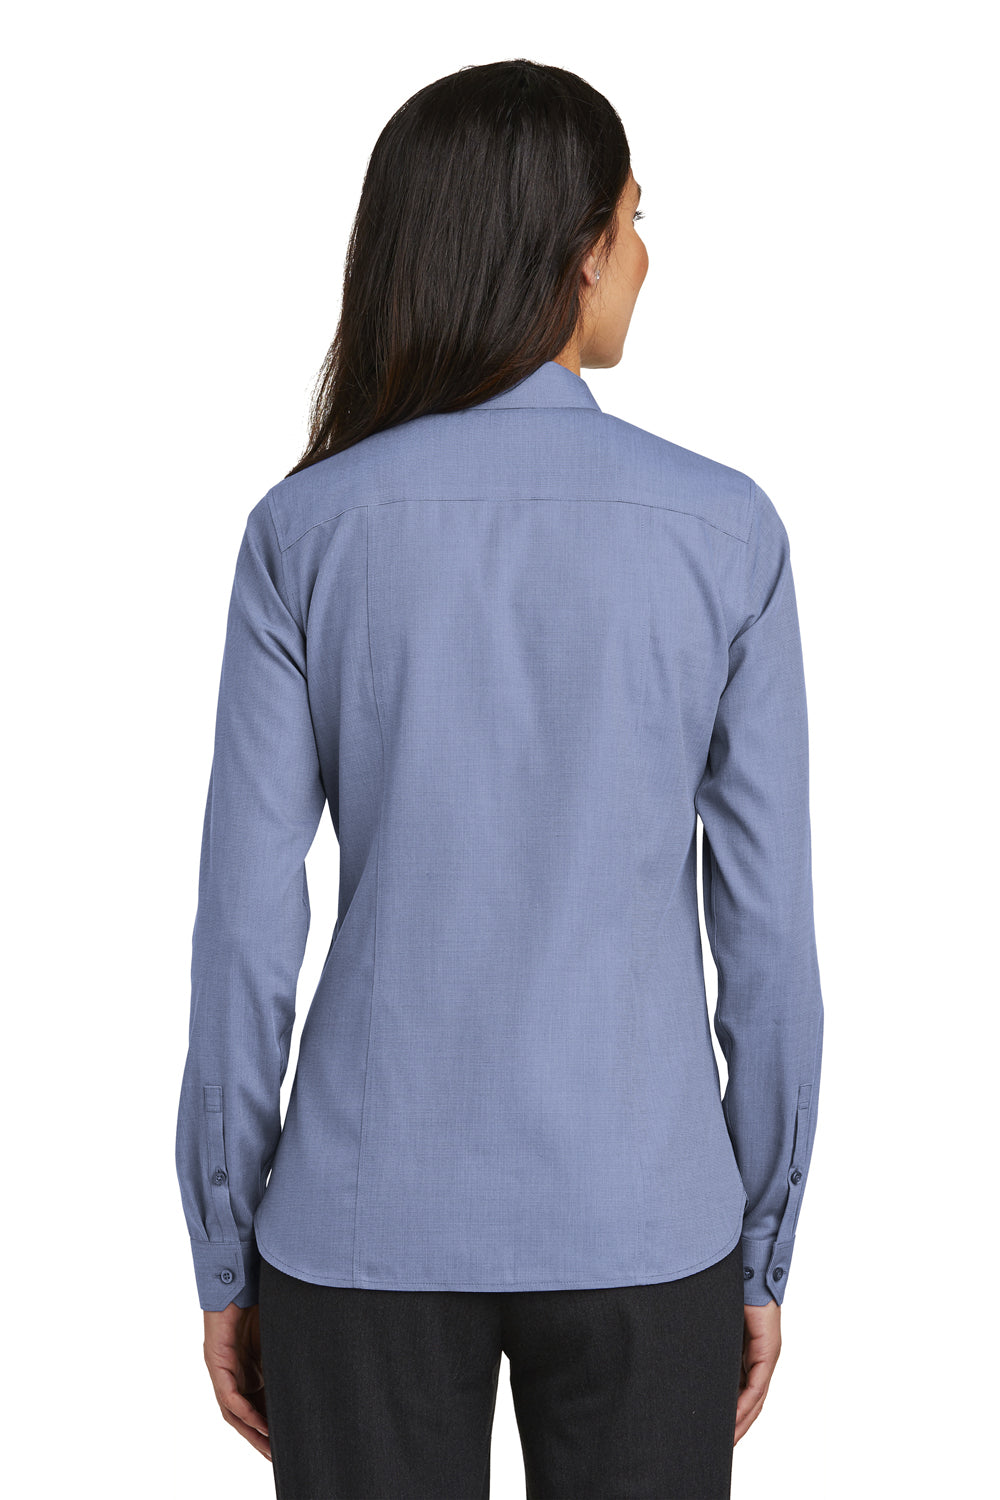 Red House RH470 Womens Nailhead Wrinkle Resistant Long Sleeve Button Down Shirt Navy Blue Back